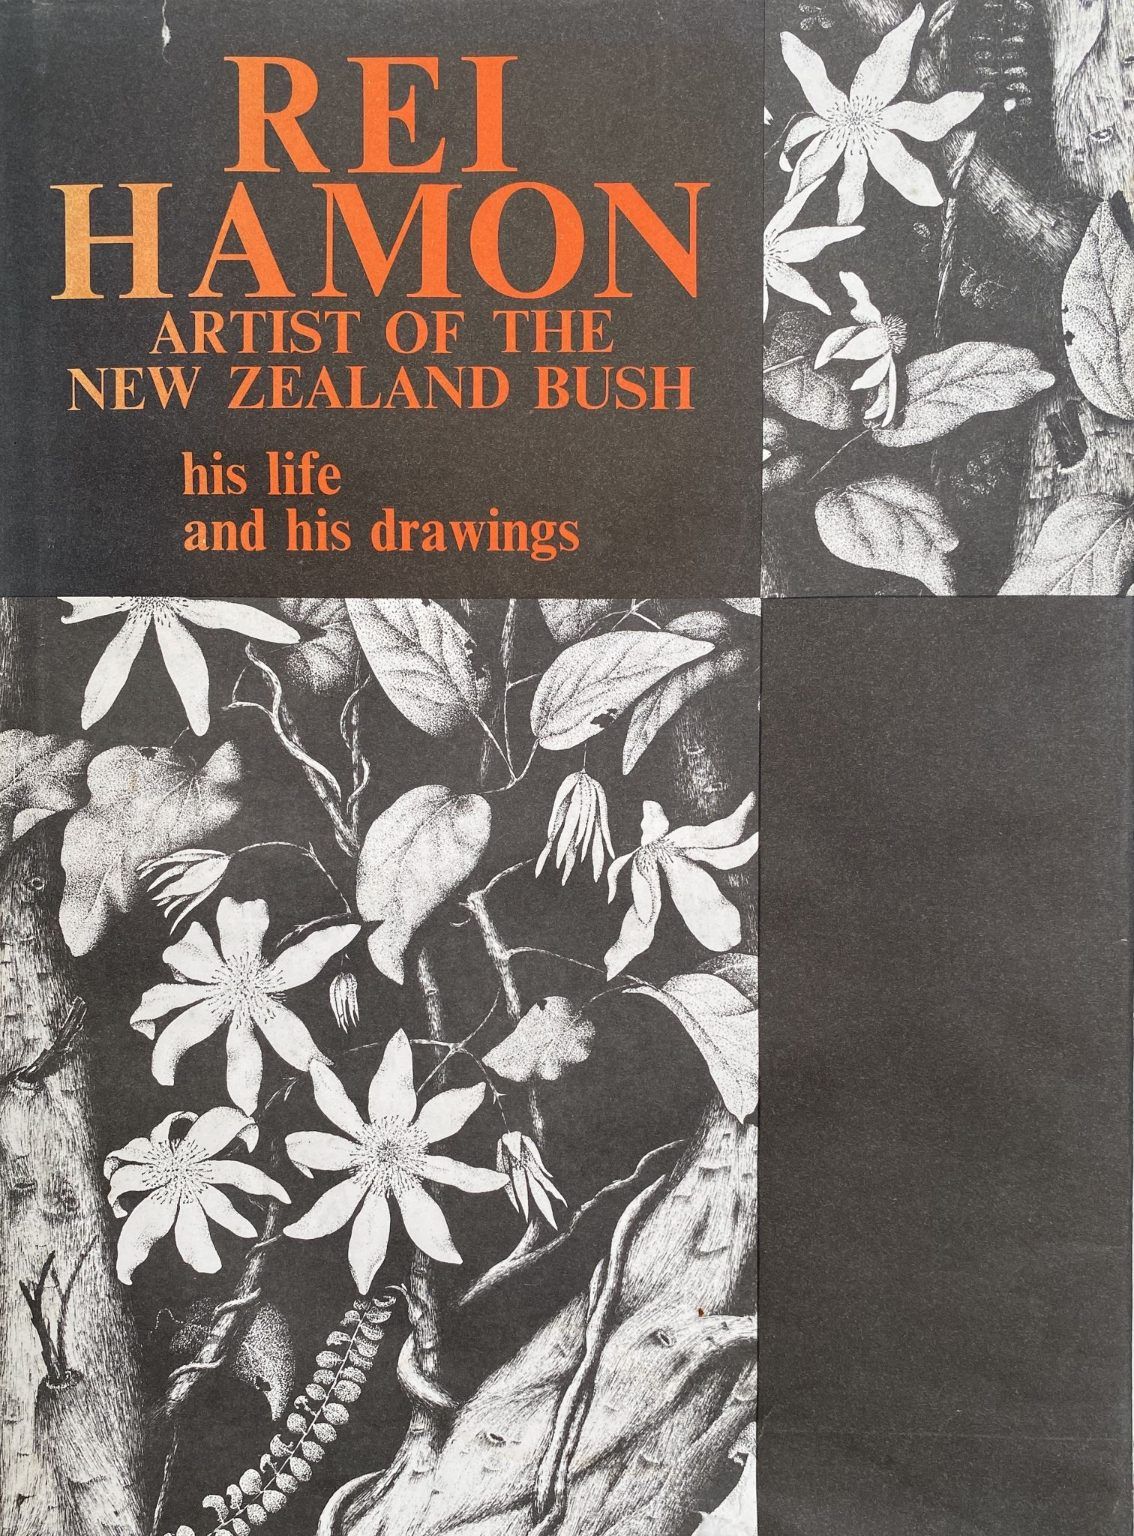 REI HAMON: Artist of the New Zealand Bush - his life and drawings